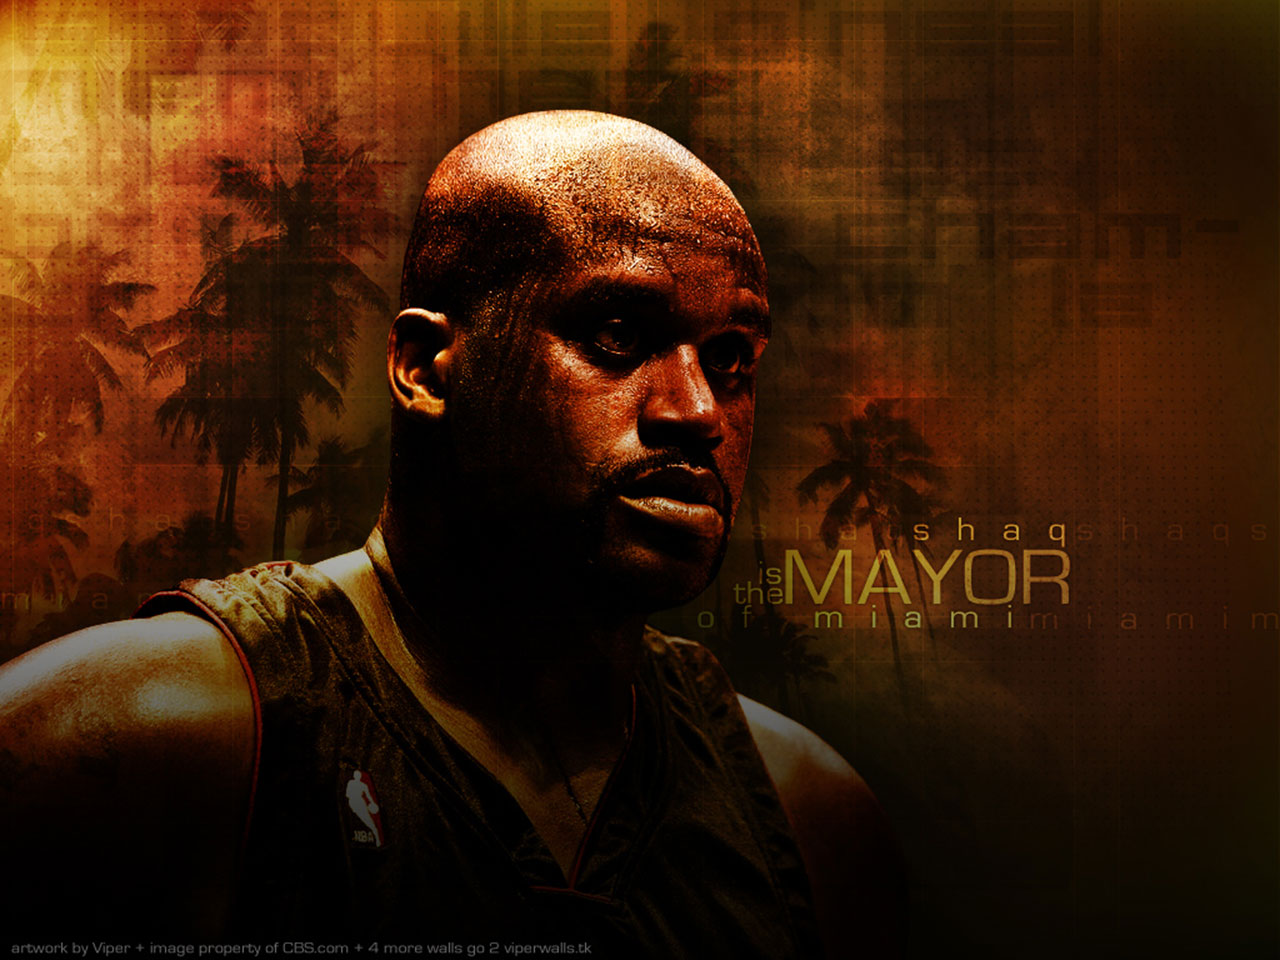 The second one is wallpaper of Shaquille O'Neal as member of Miami Heat 